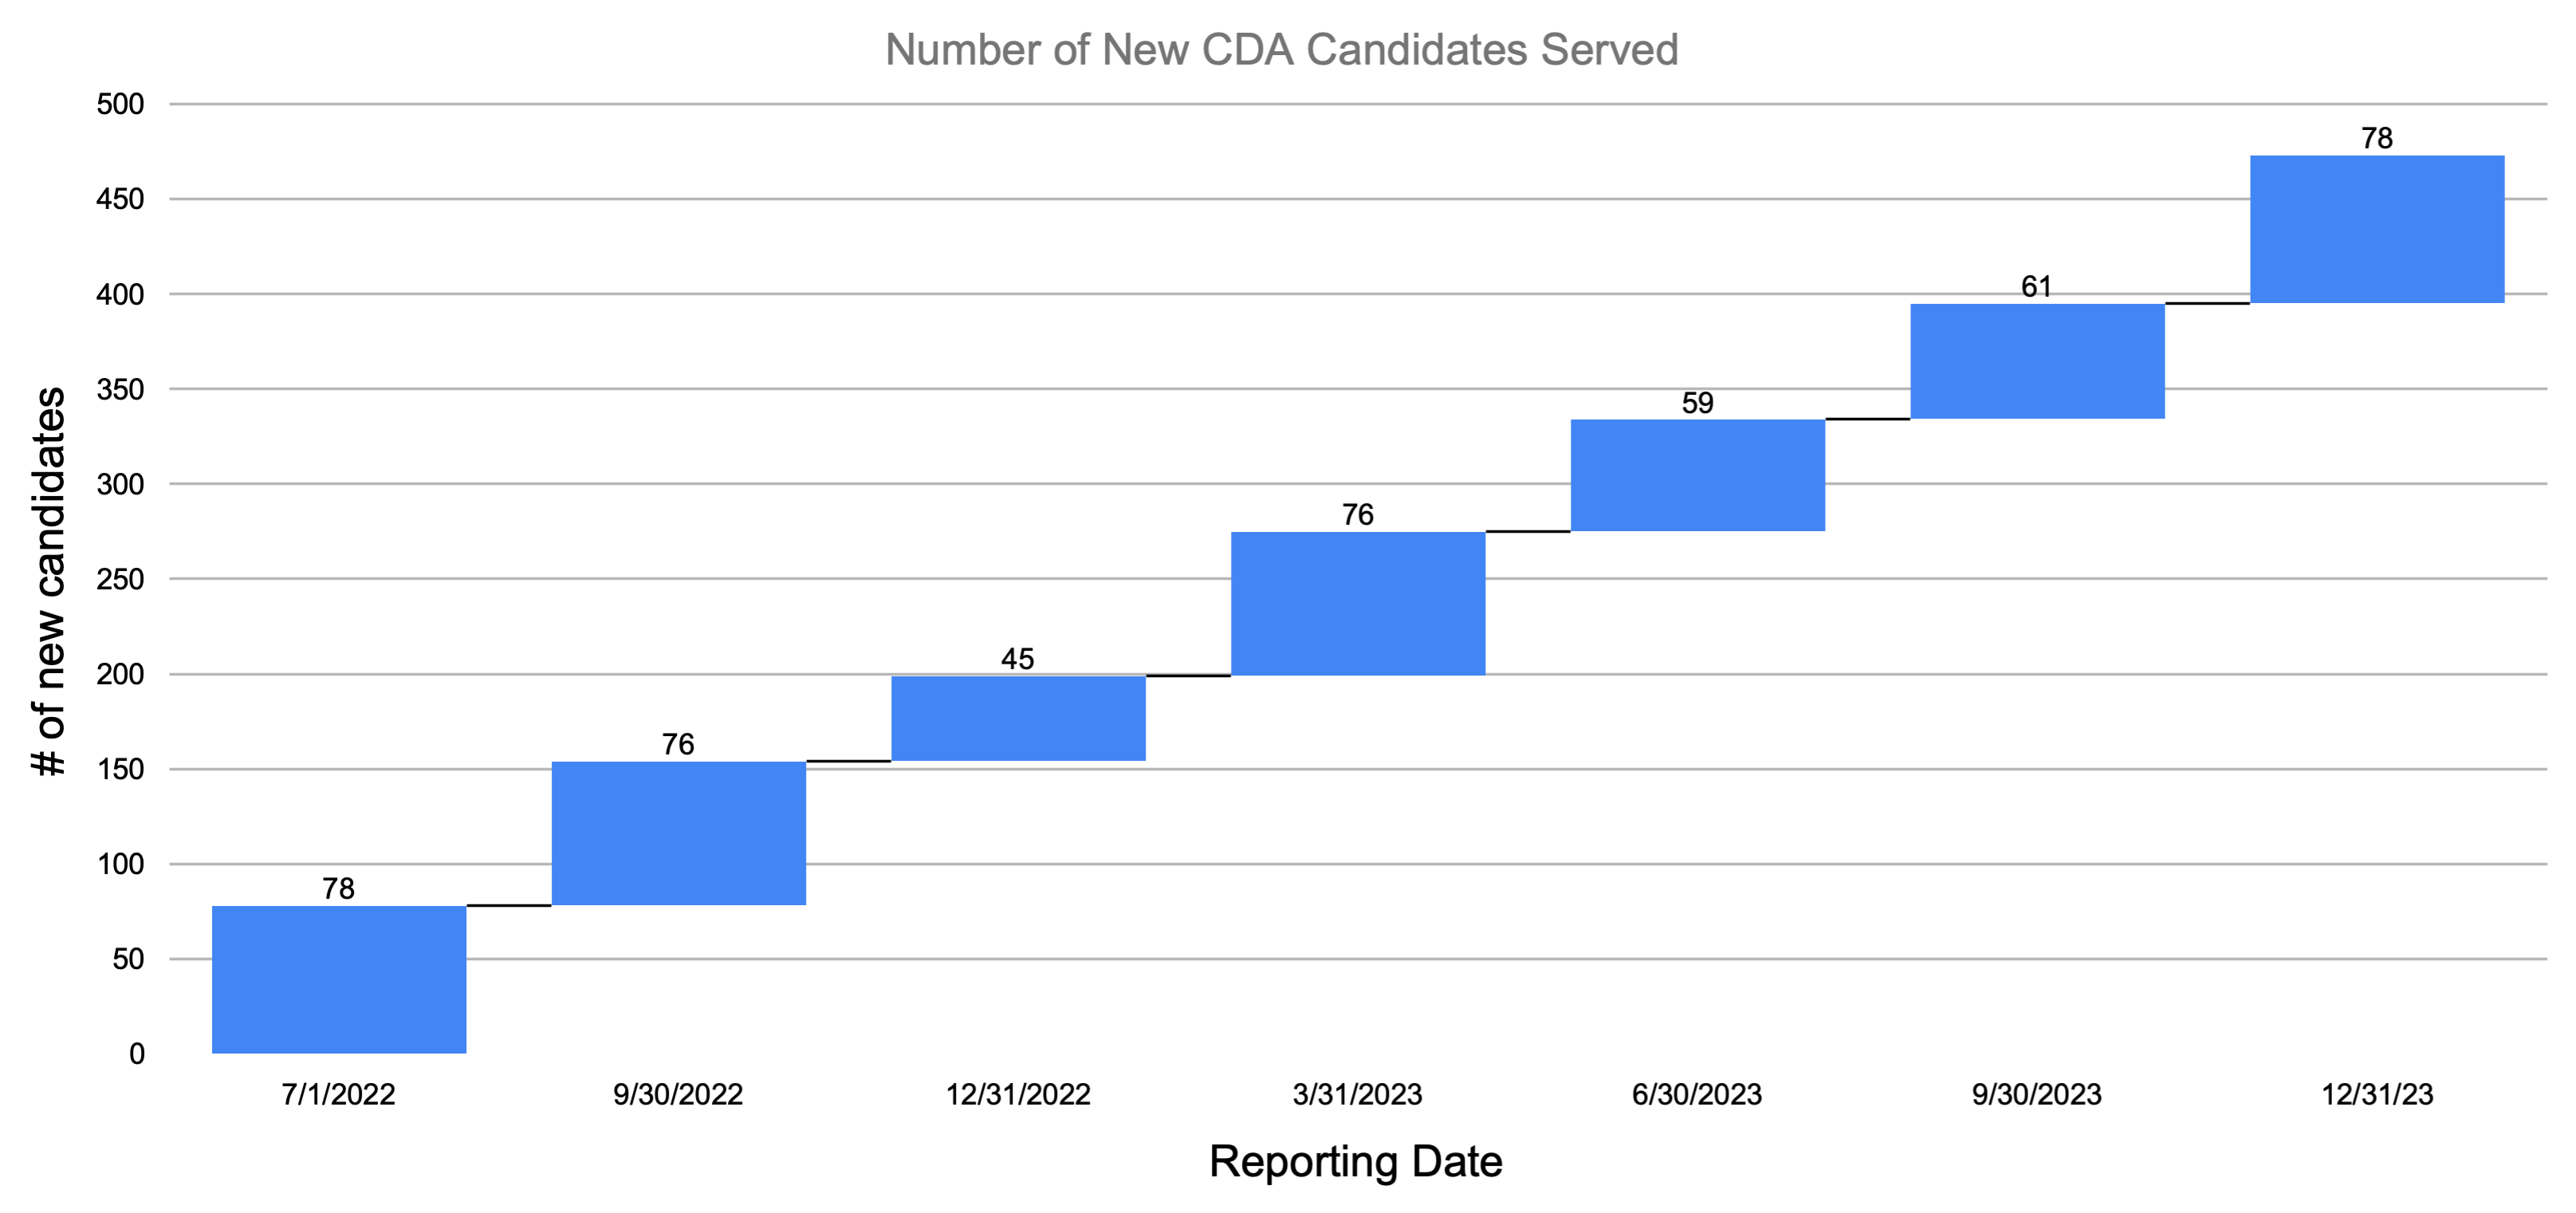 bar chart showing the number of new candidates by quarter